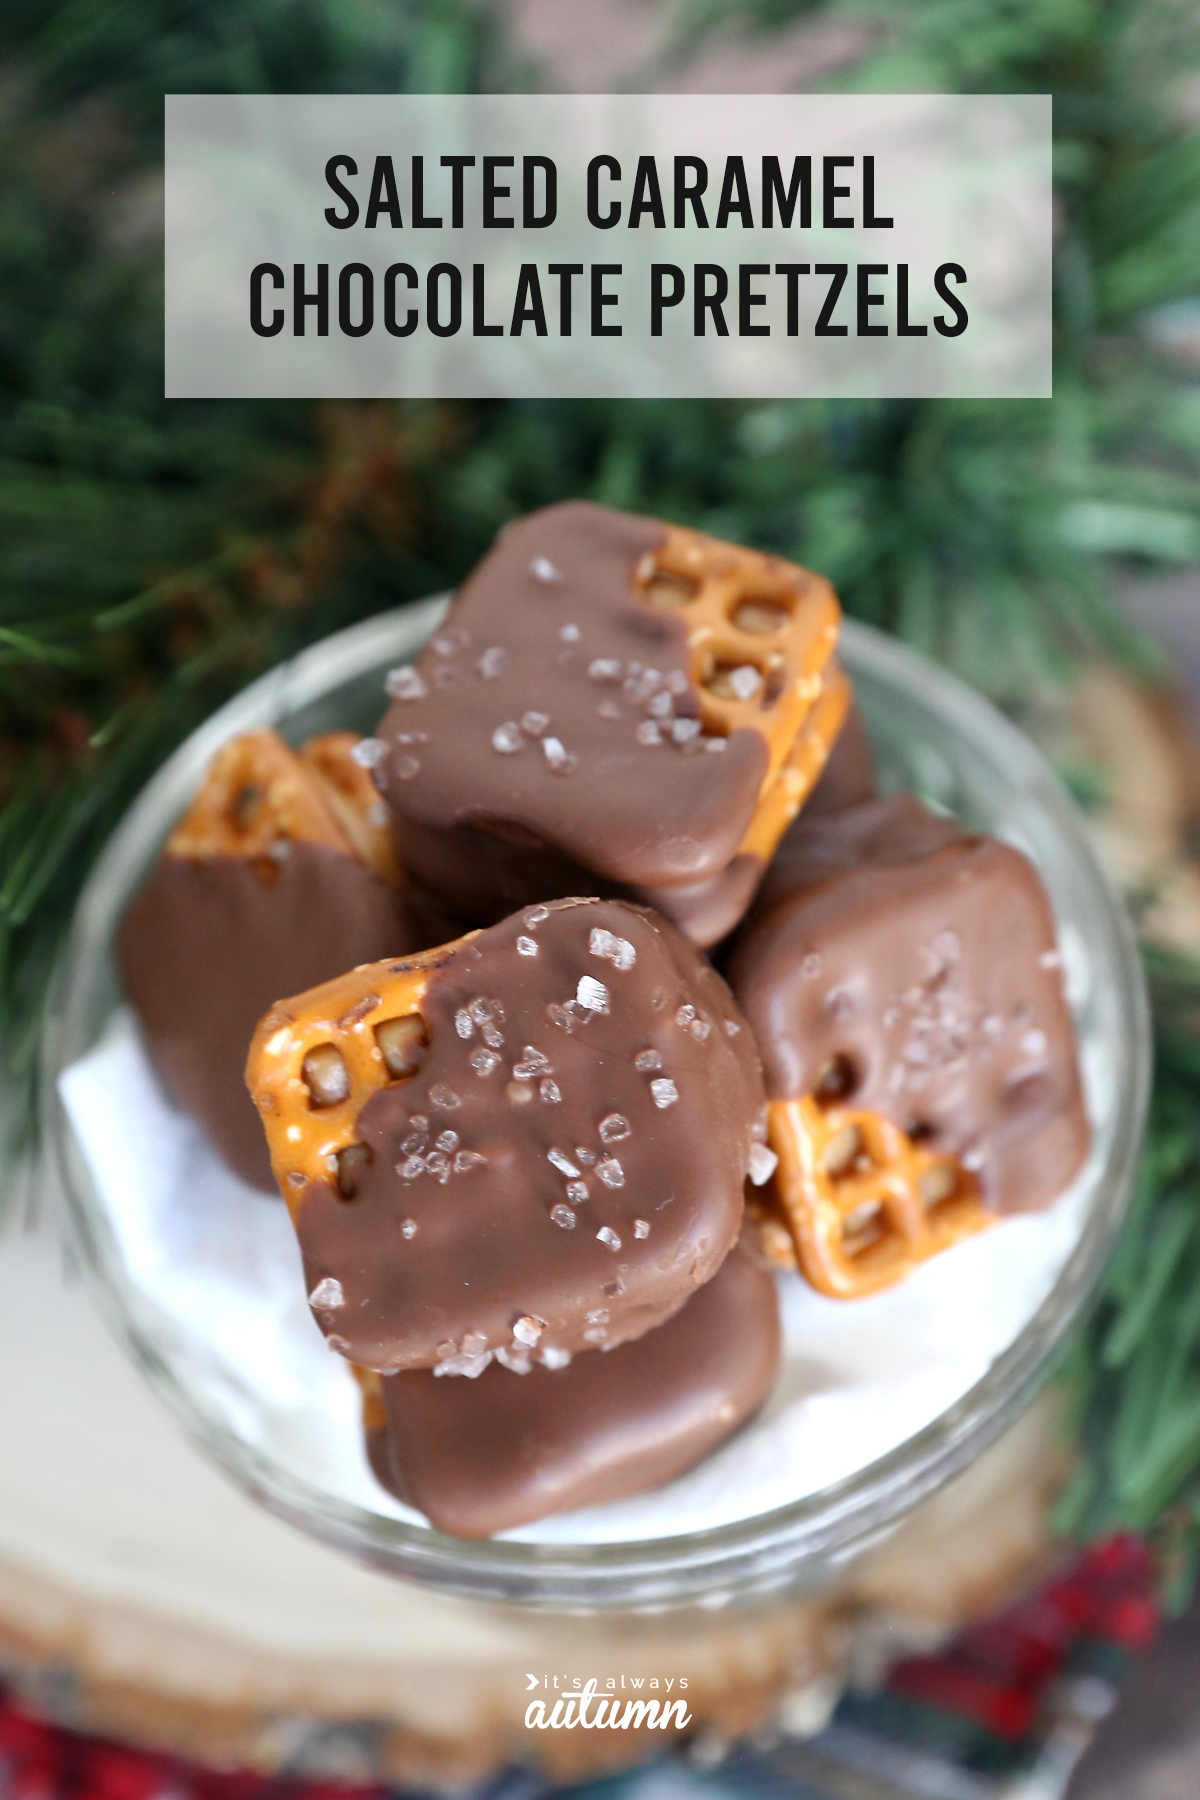 These salted caramel chocolate pretzels are AMAZING! Perfect treat for homemade gifts or Christmas parties.